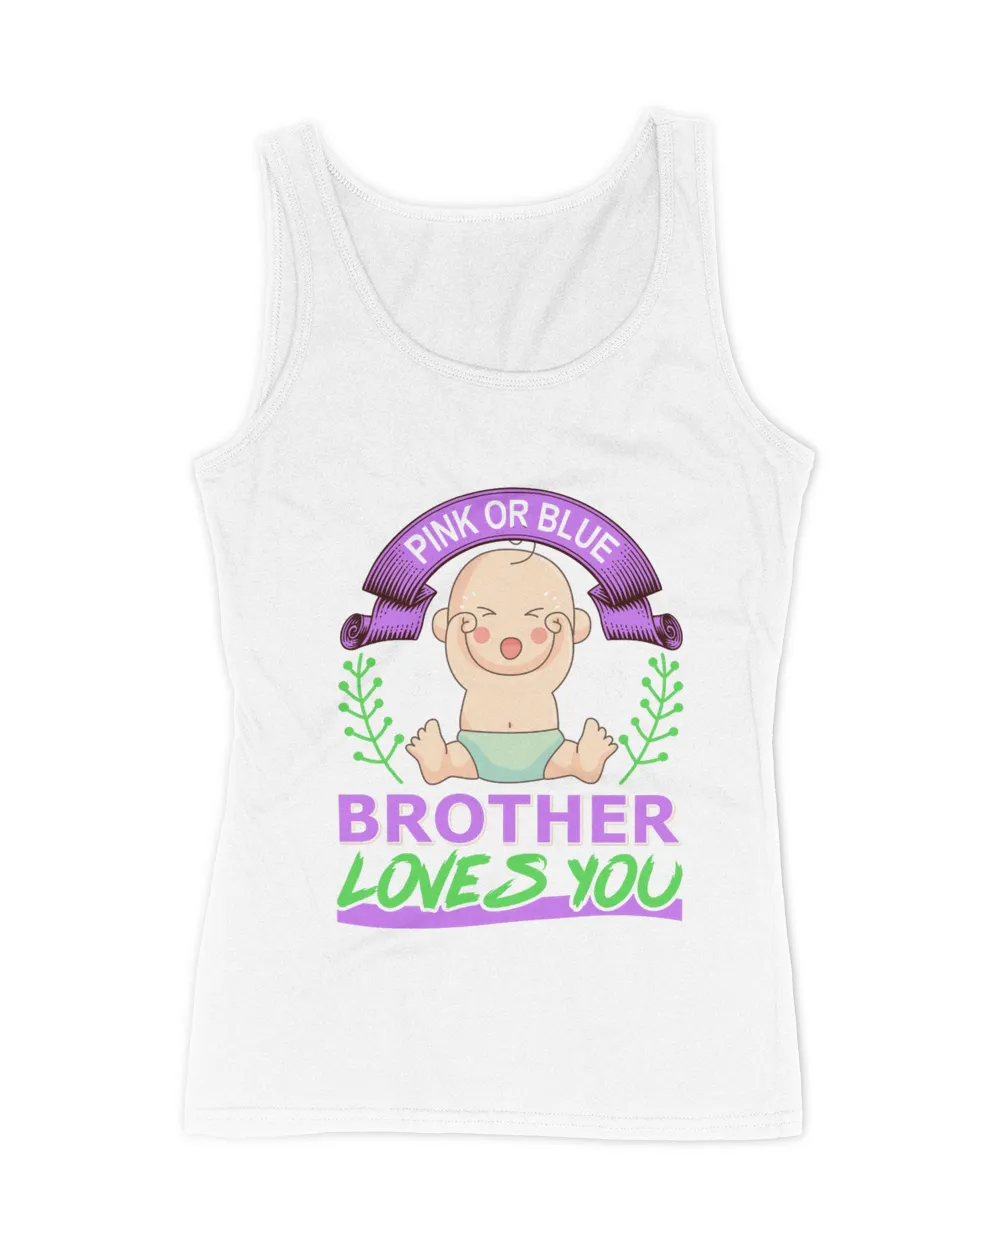 Baby Shirt, Love Baby T-Shirt, Infant baby suit (15)